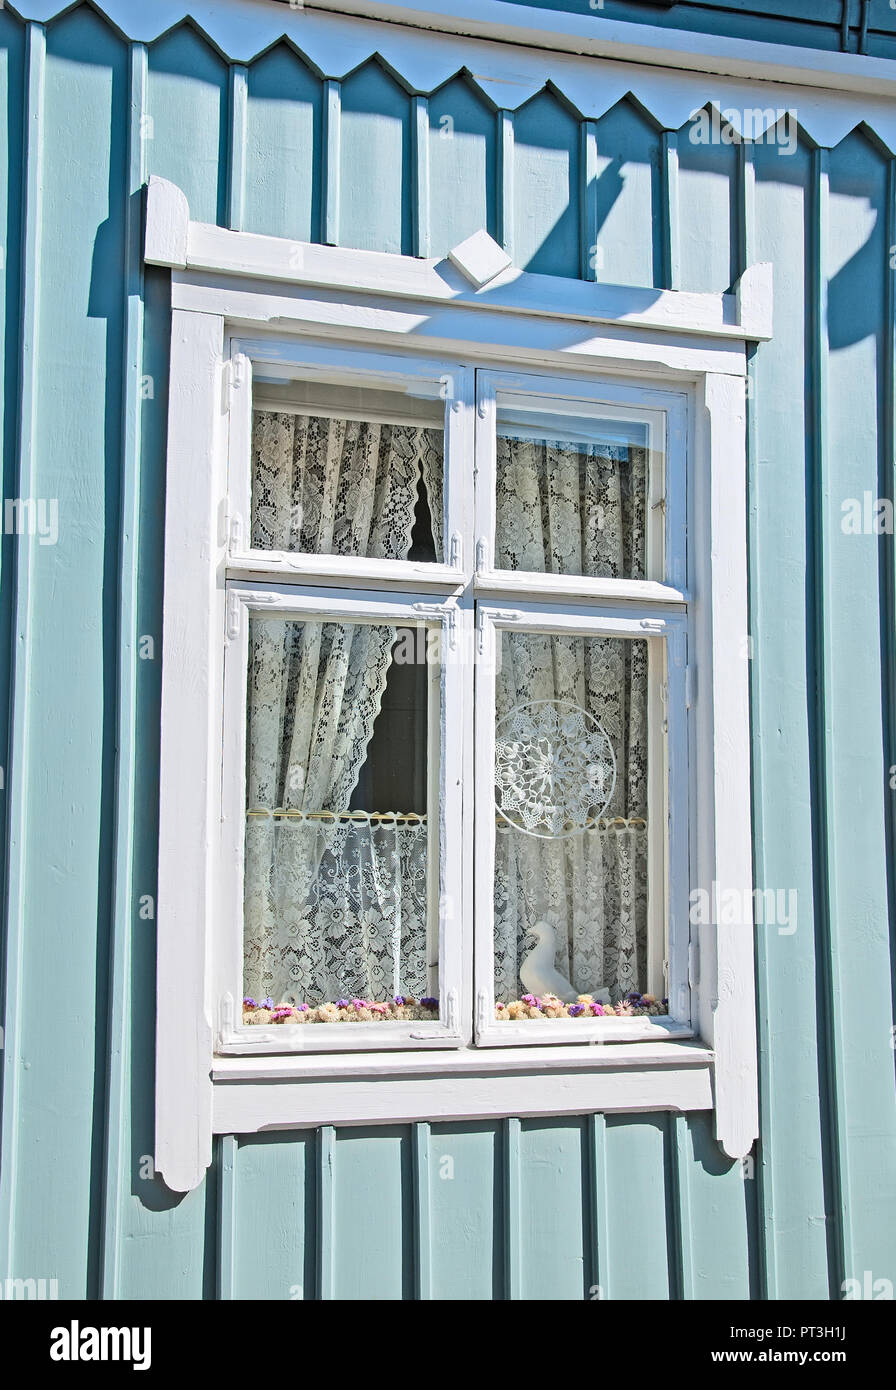 RAUMA, FINLAND - JULY 6, 2013: White lace in the window. Rauma is famous for high quality lace (known from the XVII century). Stock Photo